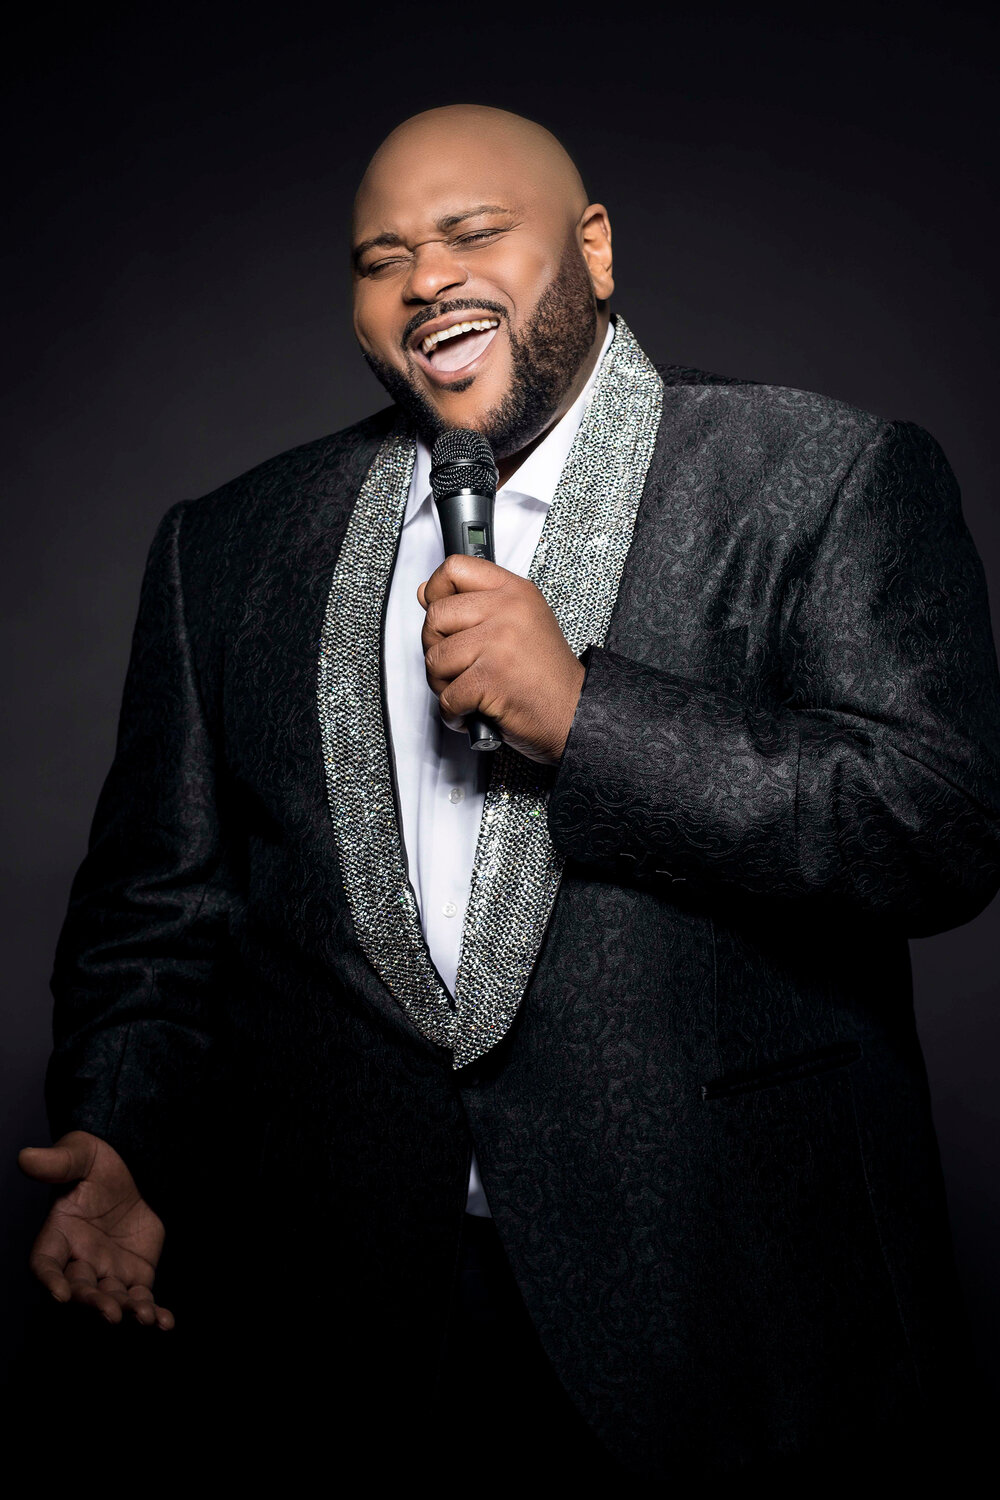 Born in Germany to American parents, but raised in Alabama, Ruben Studdard auditioned in Nashville for American Idol season two at the age of 24 and took the win. Studdard has six albums including the platinum selling ‘Soulful’ and top-selling gospel album ‘I Need an Angel.’ He is best known for hits like Flying Without Wings’ and ‘Sorry 2004.’